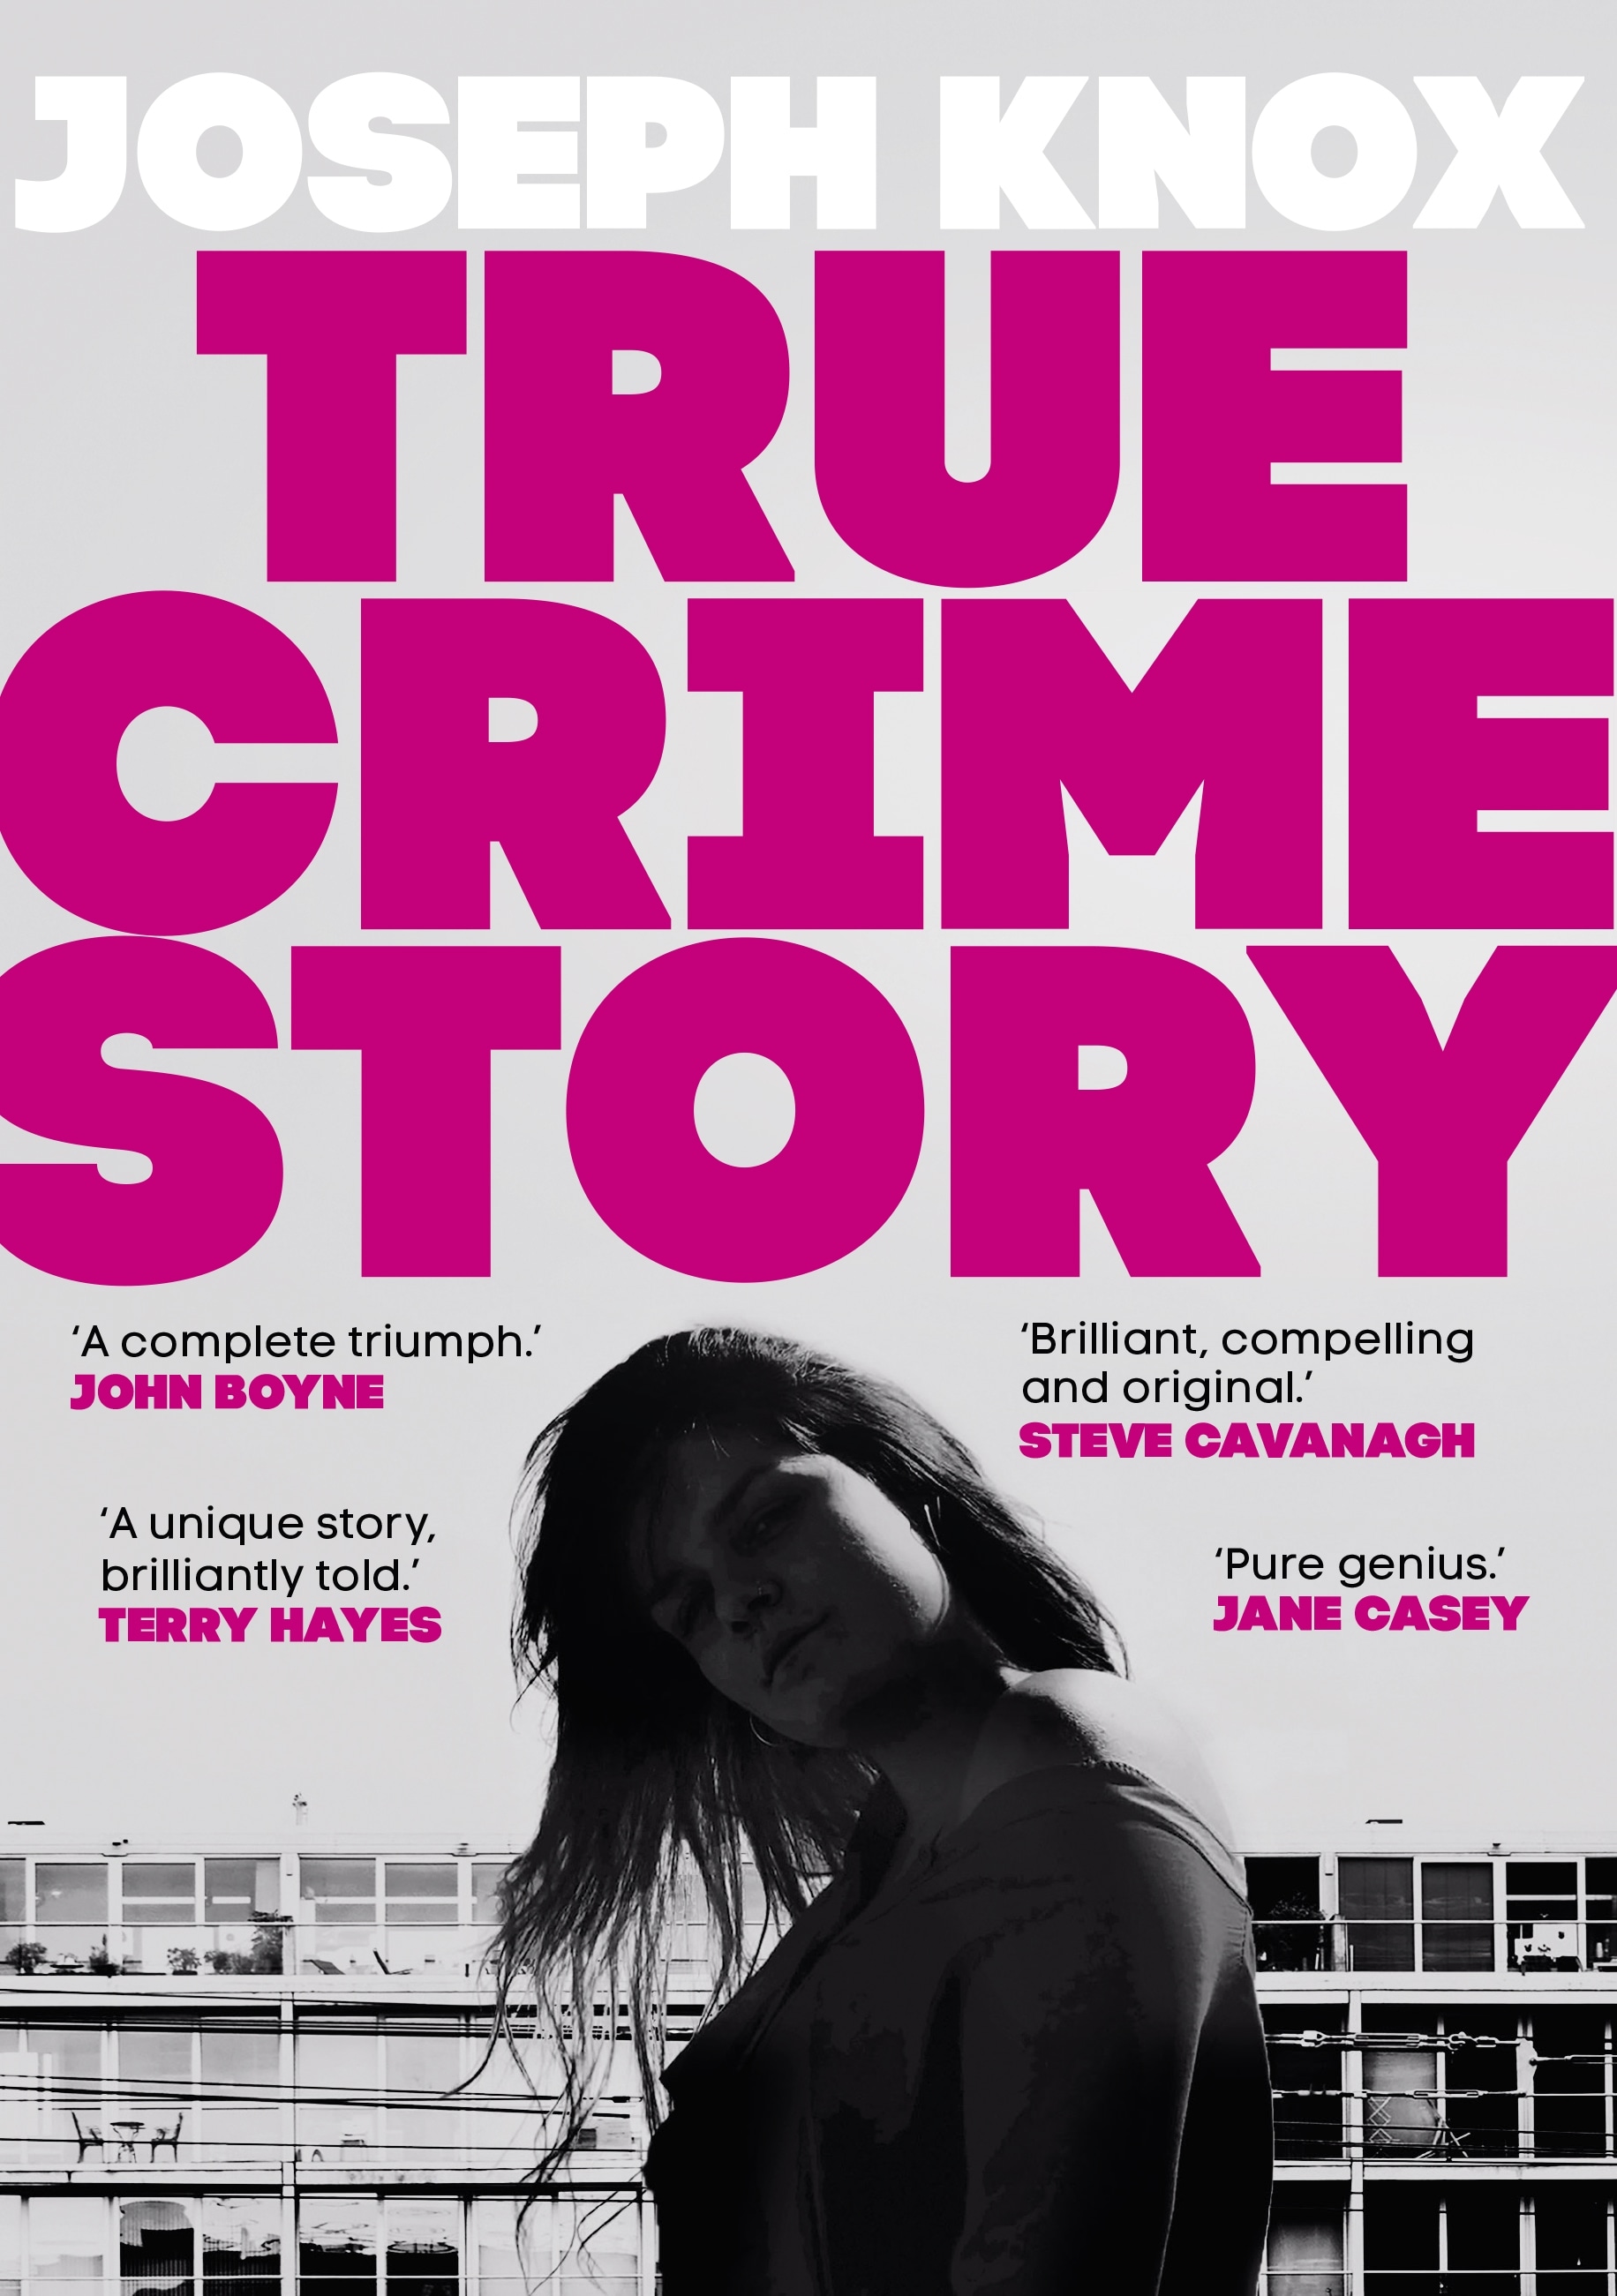 Book “True Crime Story” by Joseph Knox — March 17, 2022